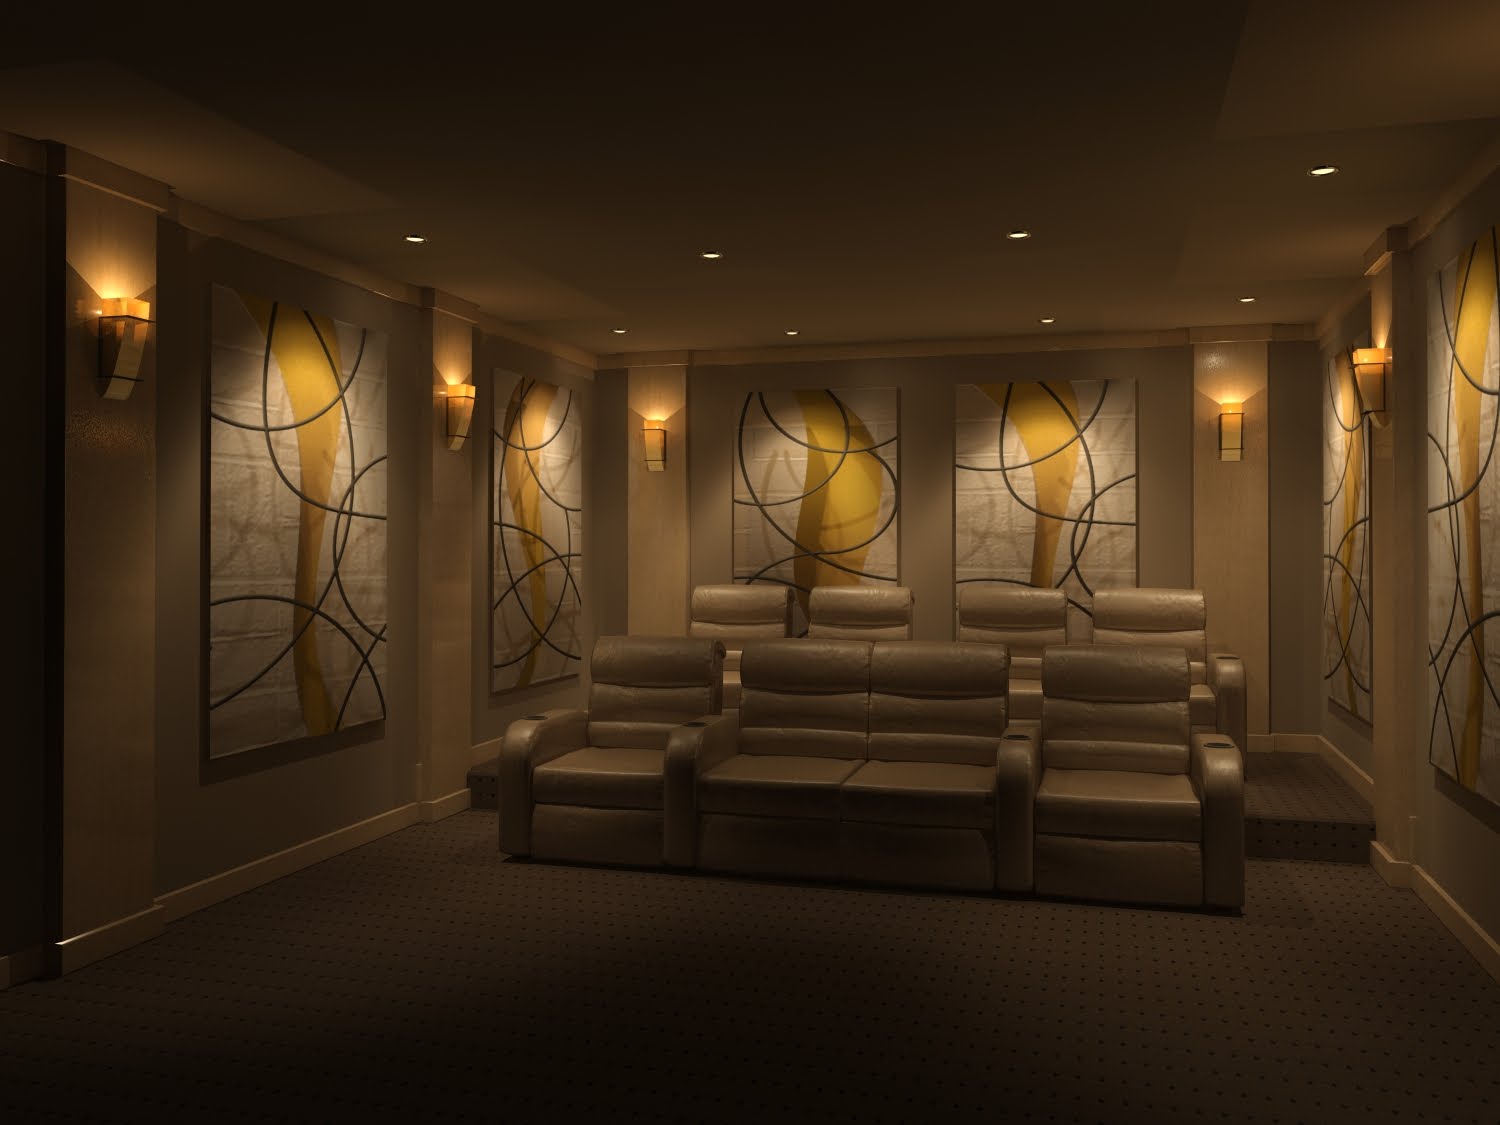 Home Theater Lighting: Illuminating The Night At Home